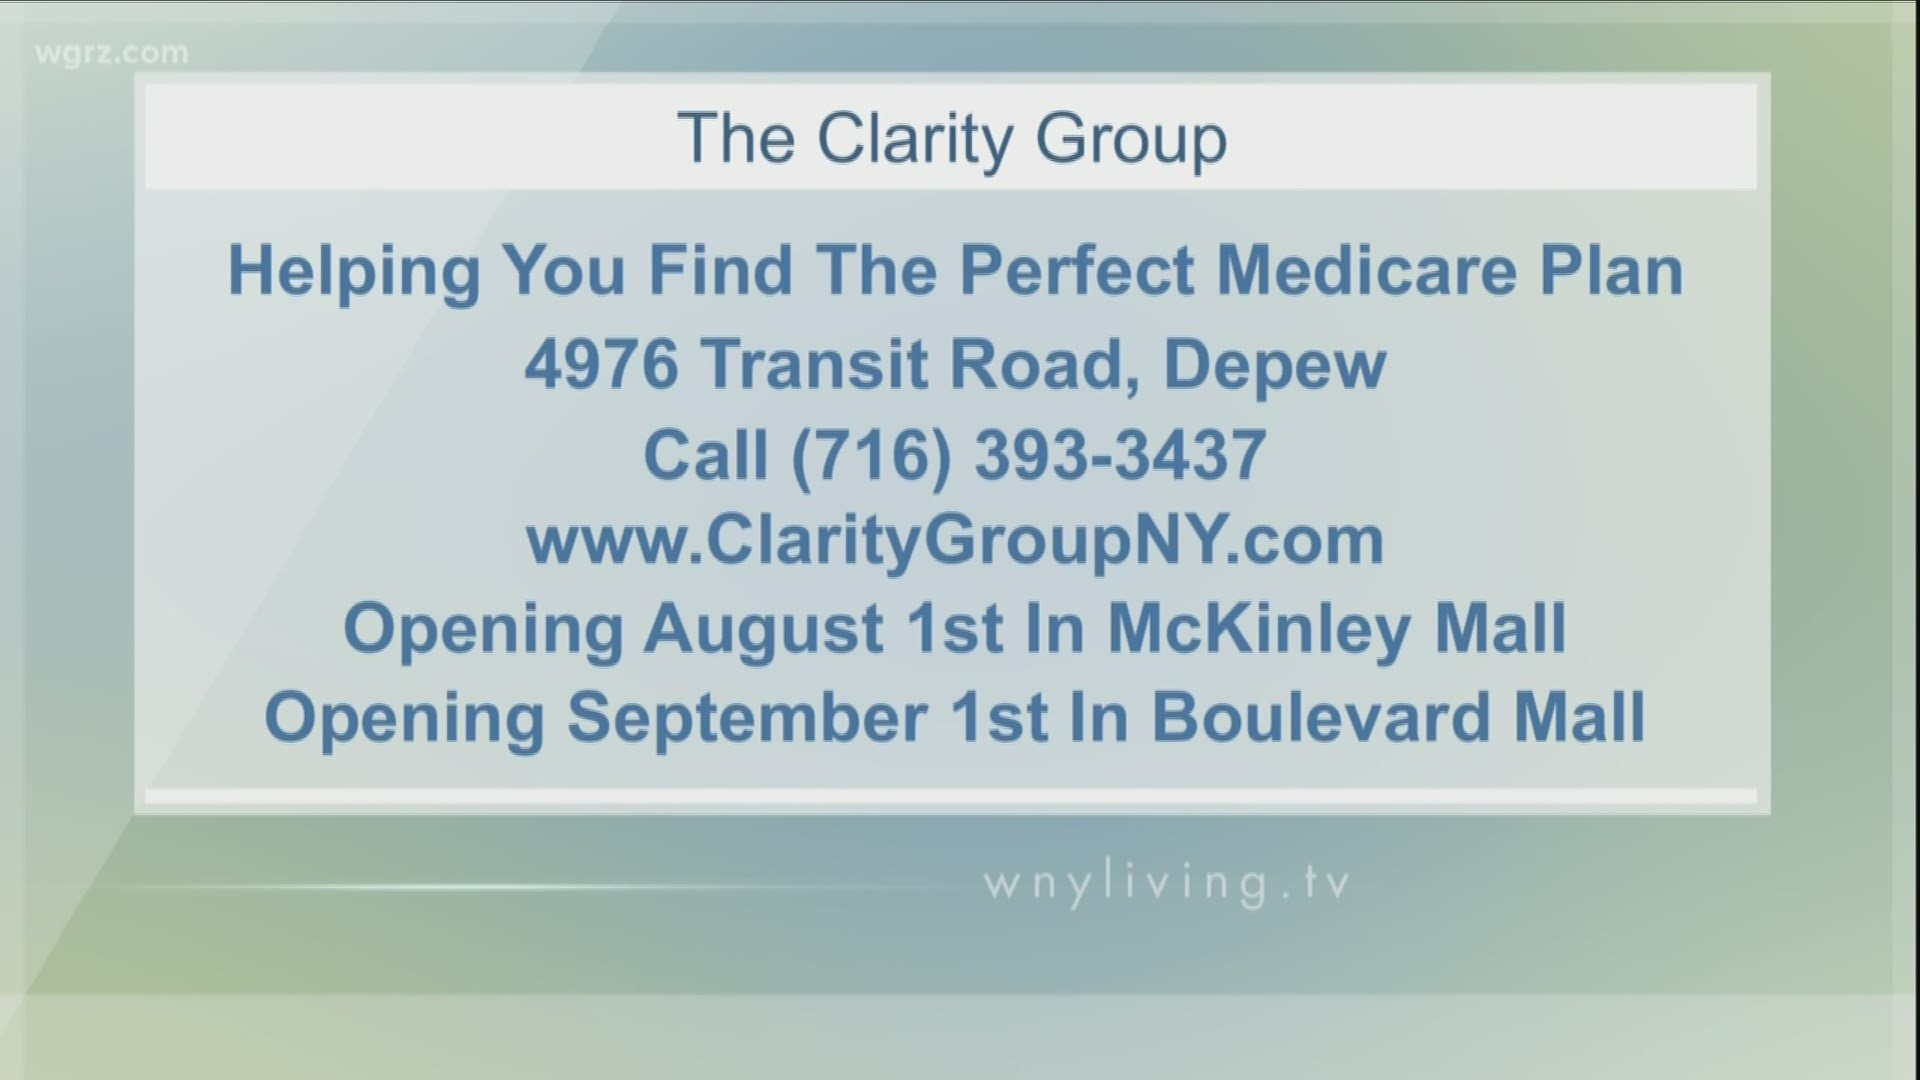 WNY Living - June 29 - The Clarity Group (SPONSORED CONTENT)